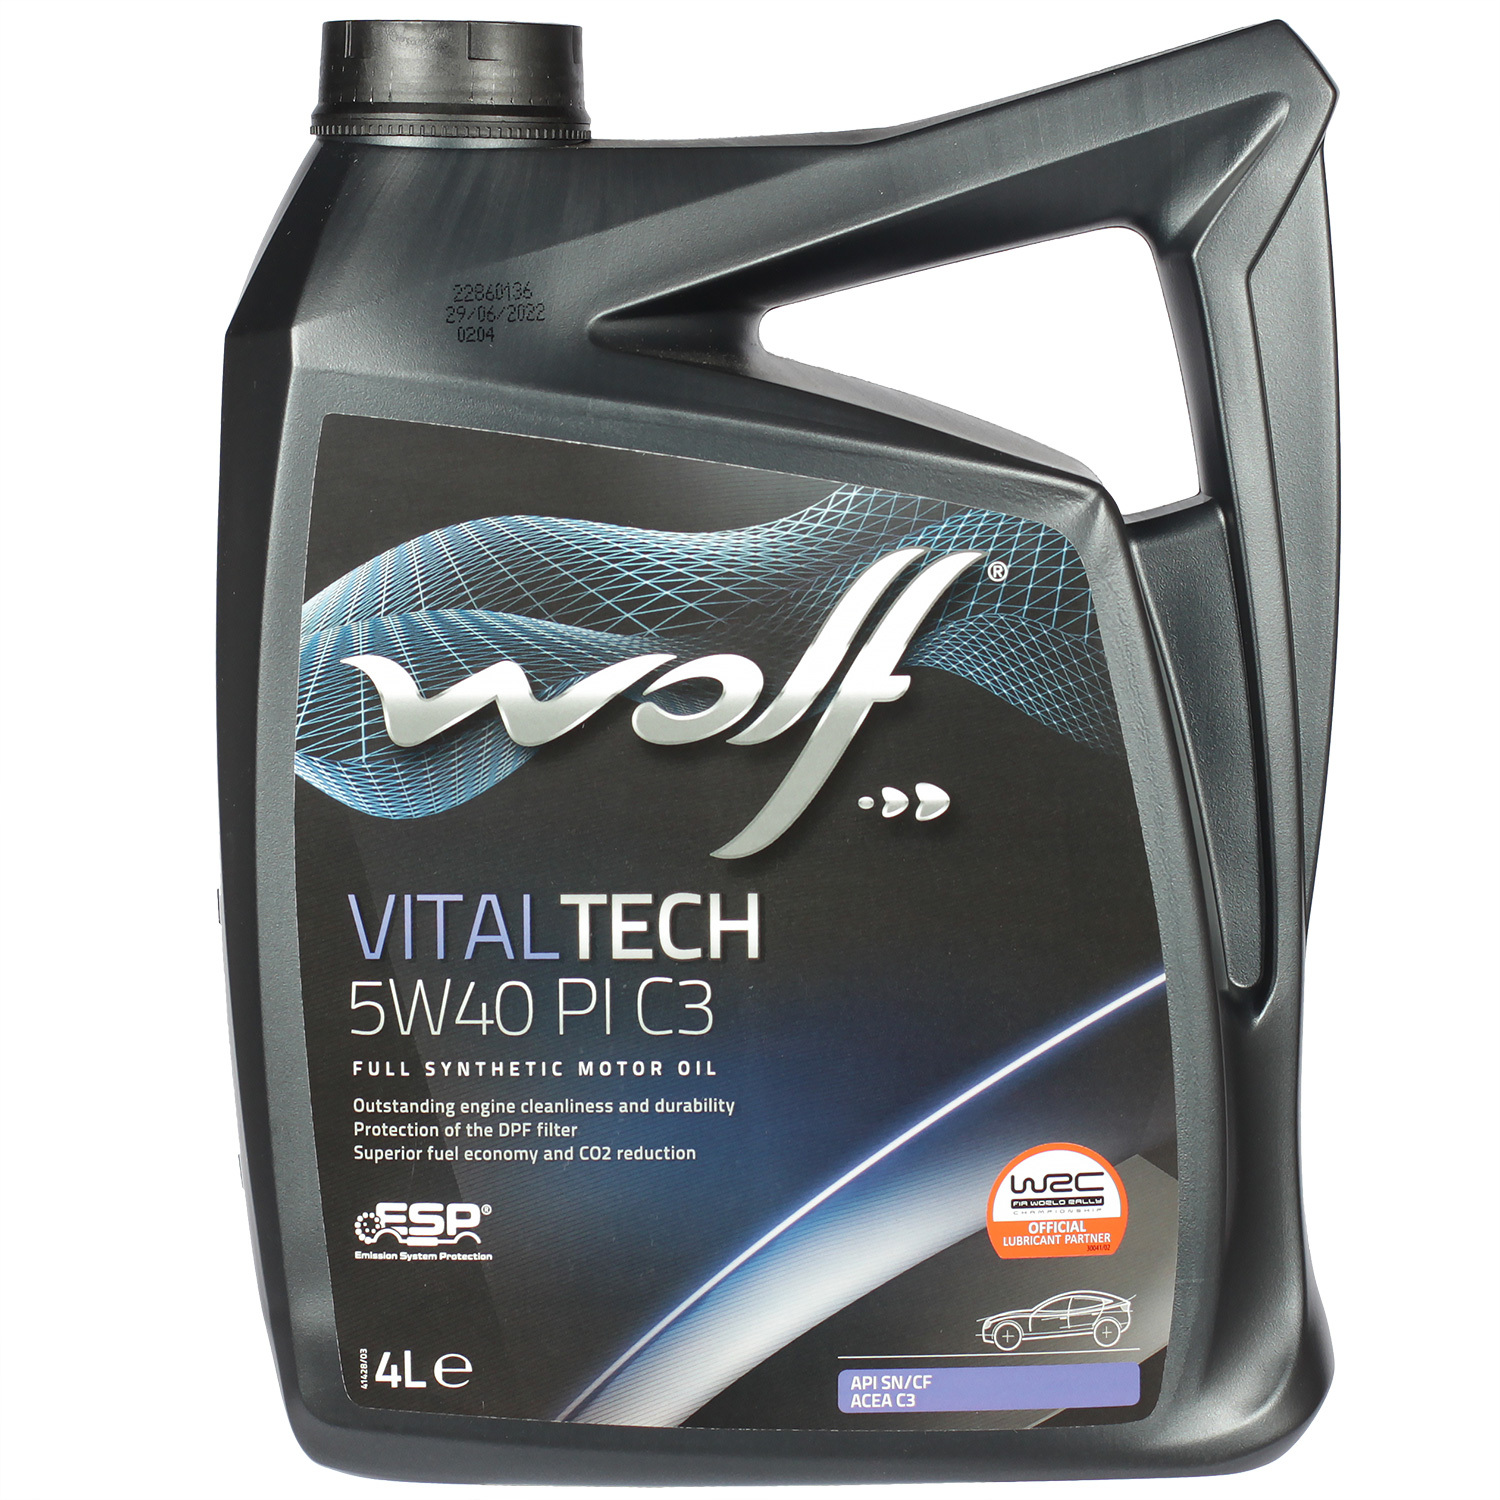 WOLF Масло моторное WOLF VITALTECH 5W-40 PI C3 4л wolf масло моторное wolf vitaltech 5w 40 pi c3 1л